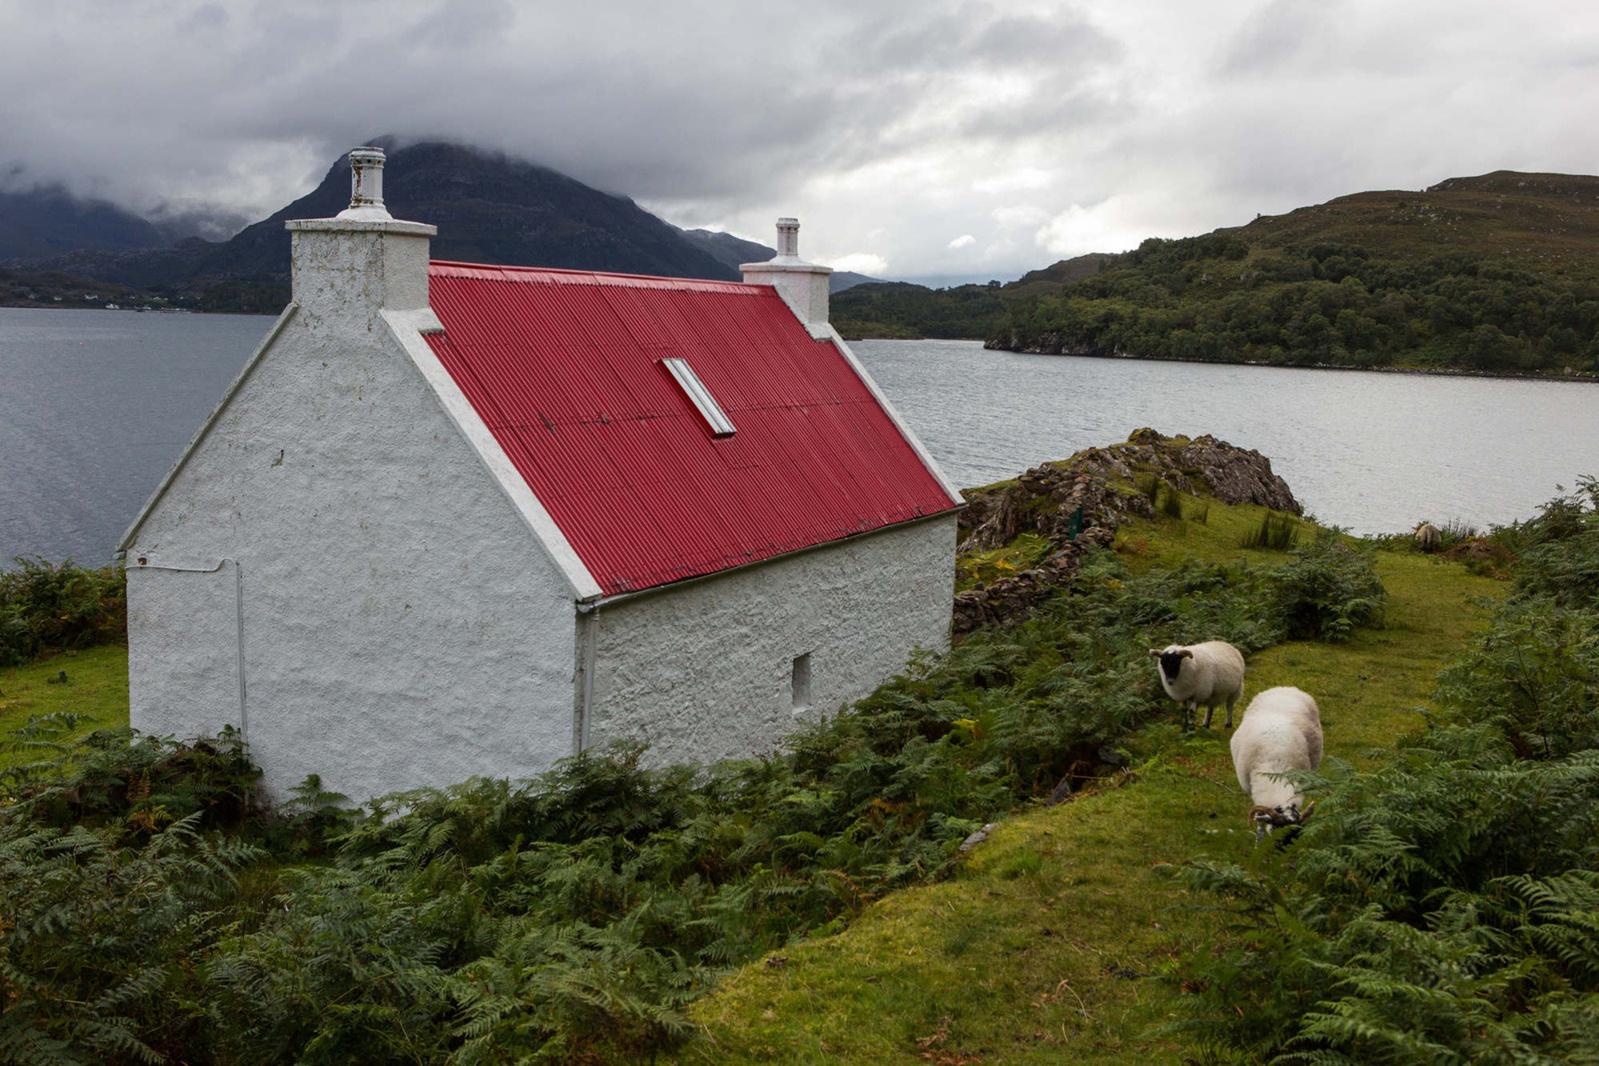 A crofterï¿½s cottage in the Highlands.